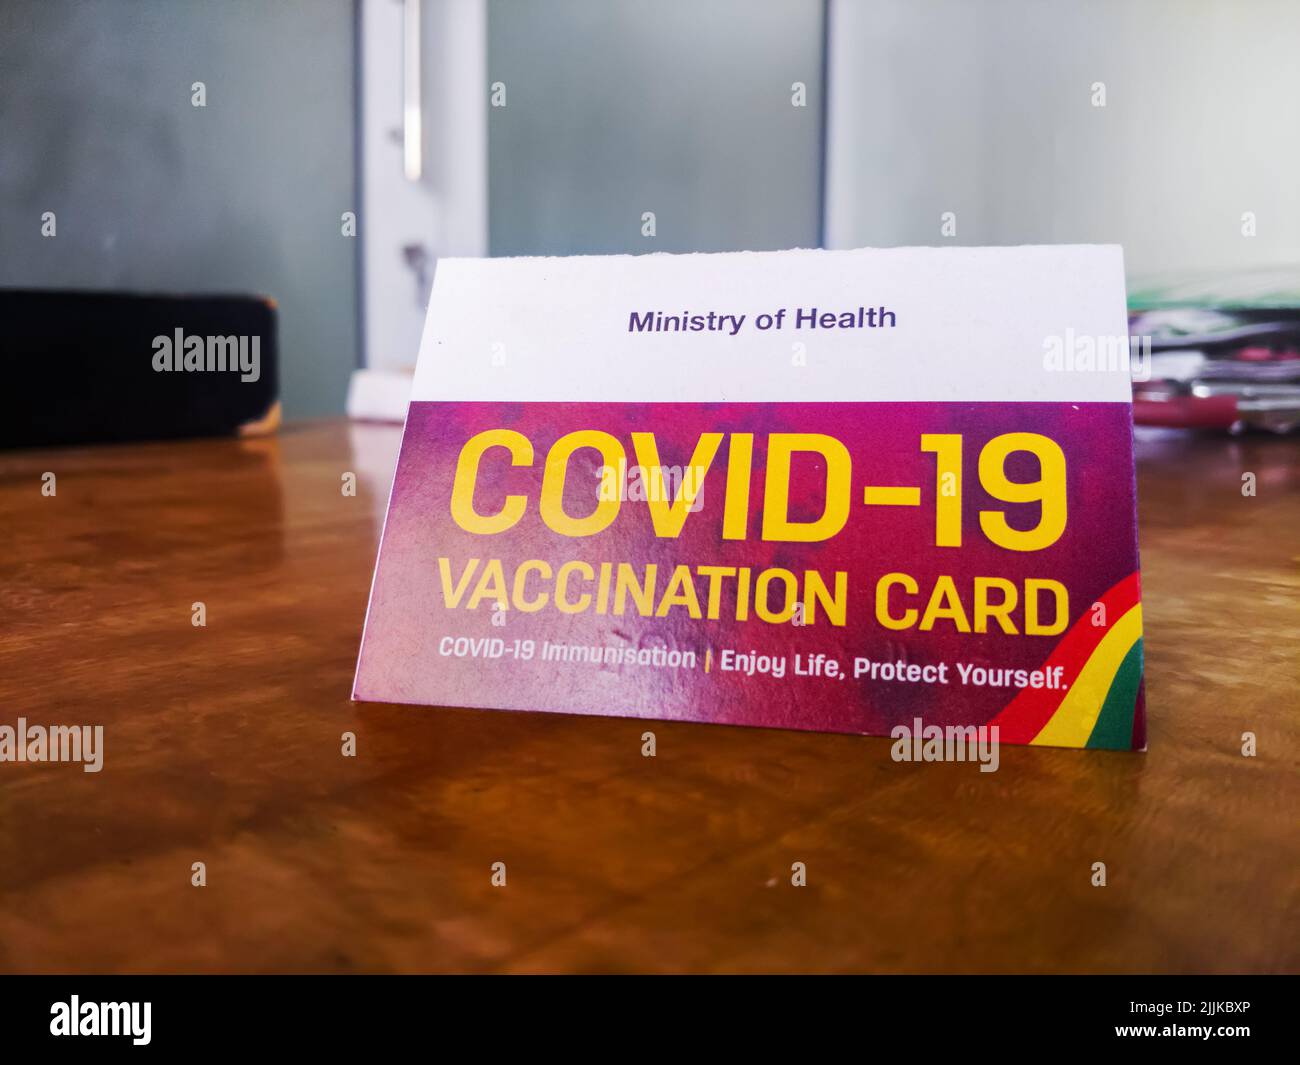 A COVID-19 vaccination card on a table Stock Photo